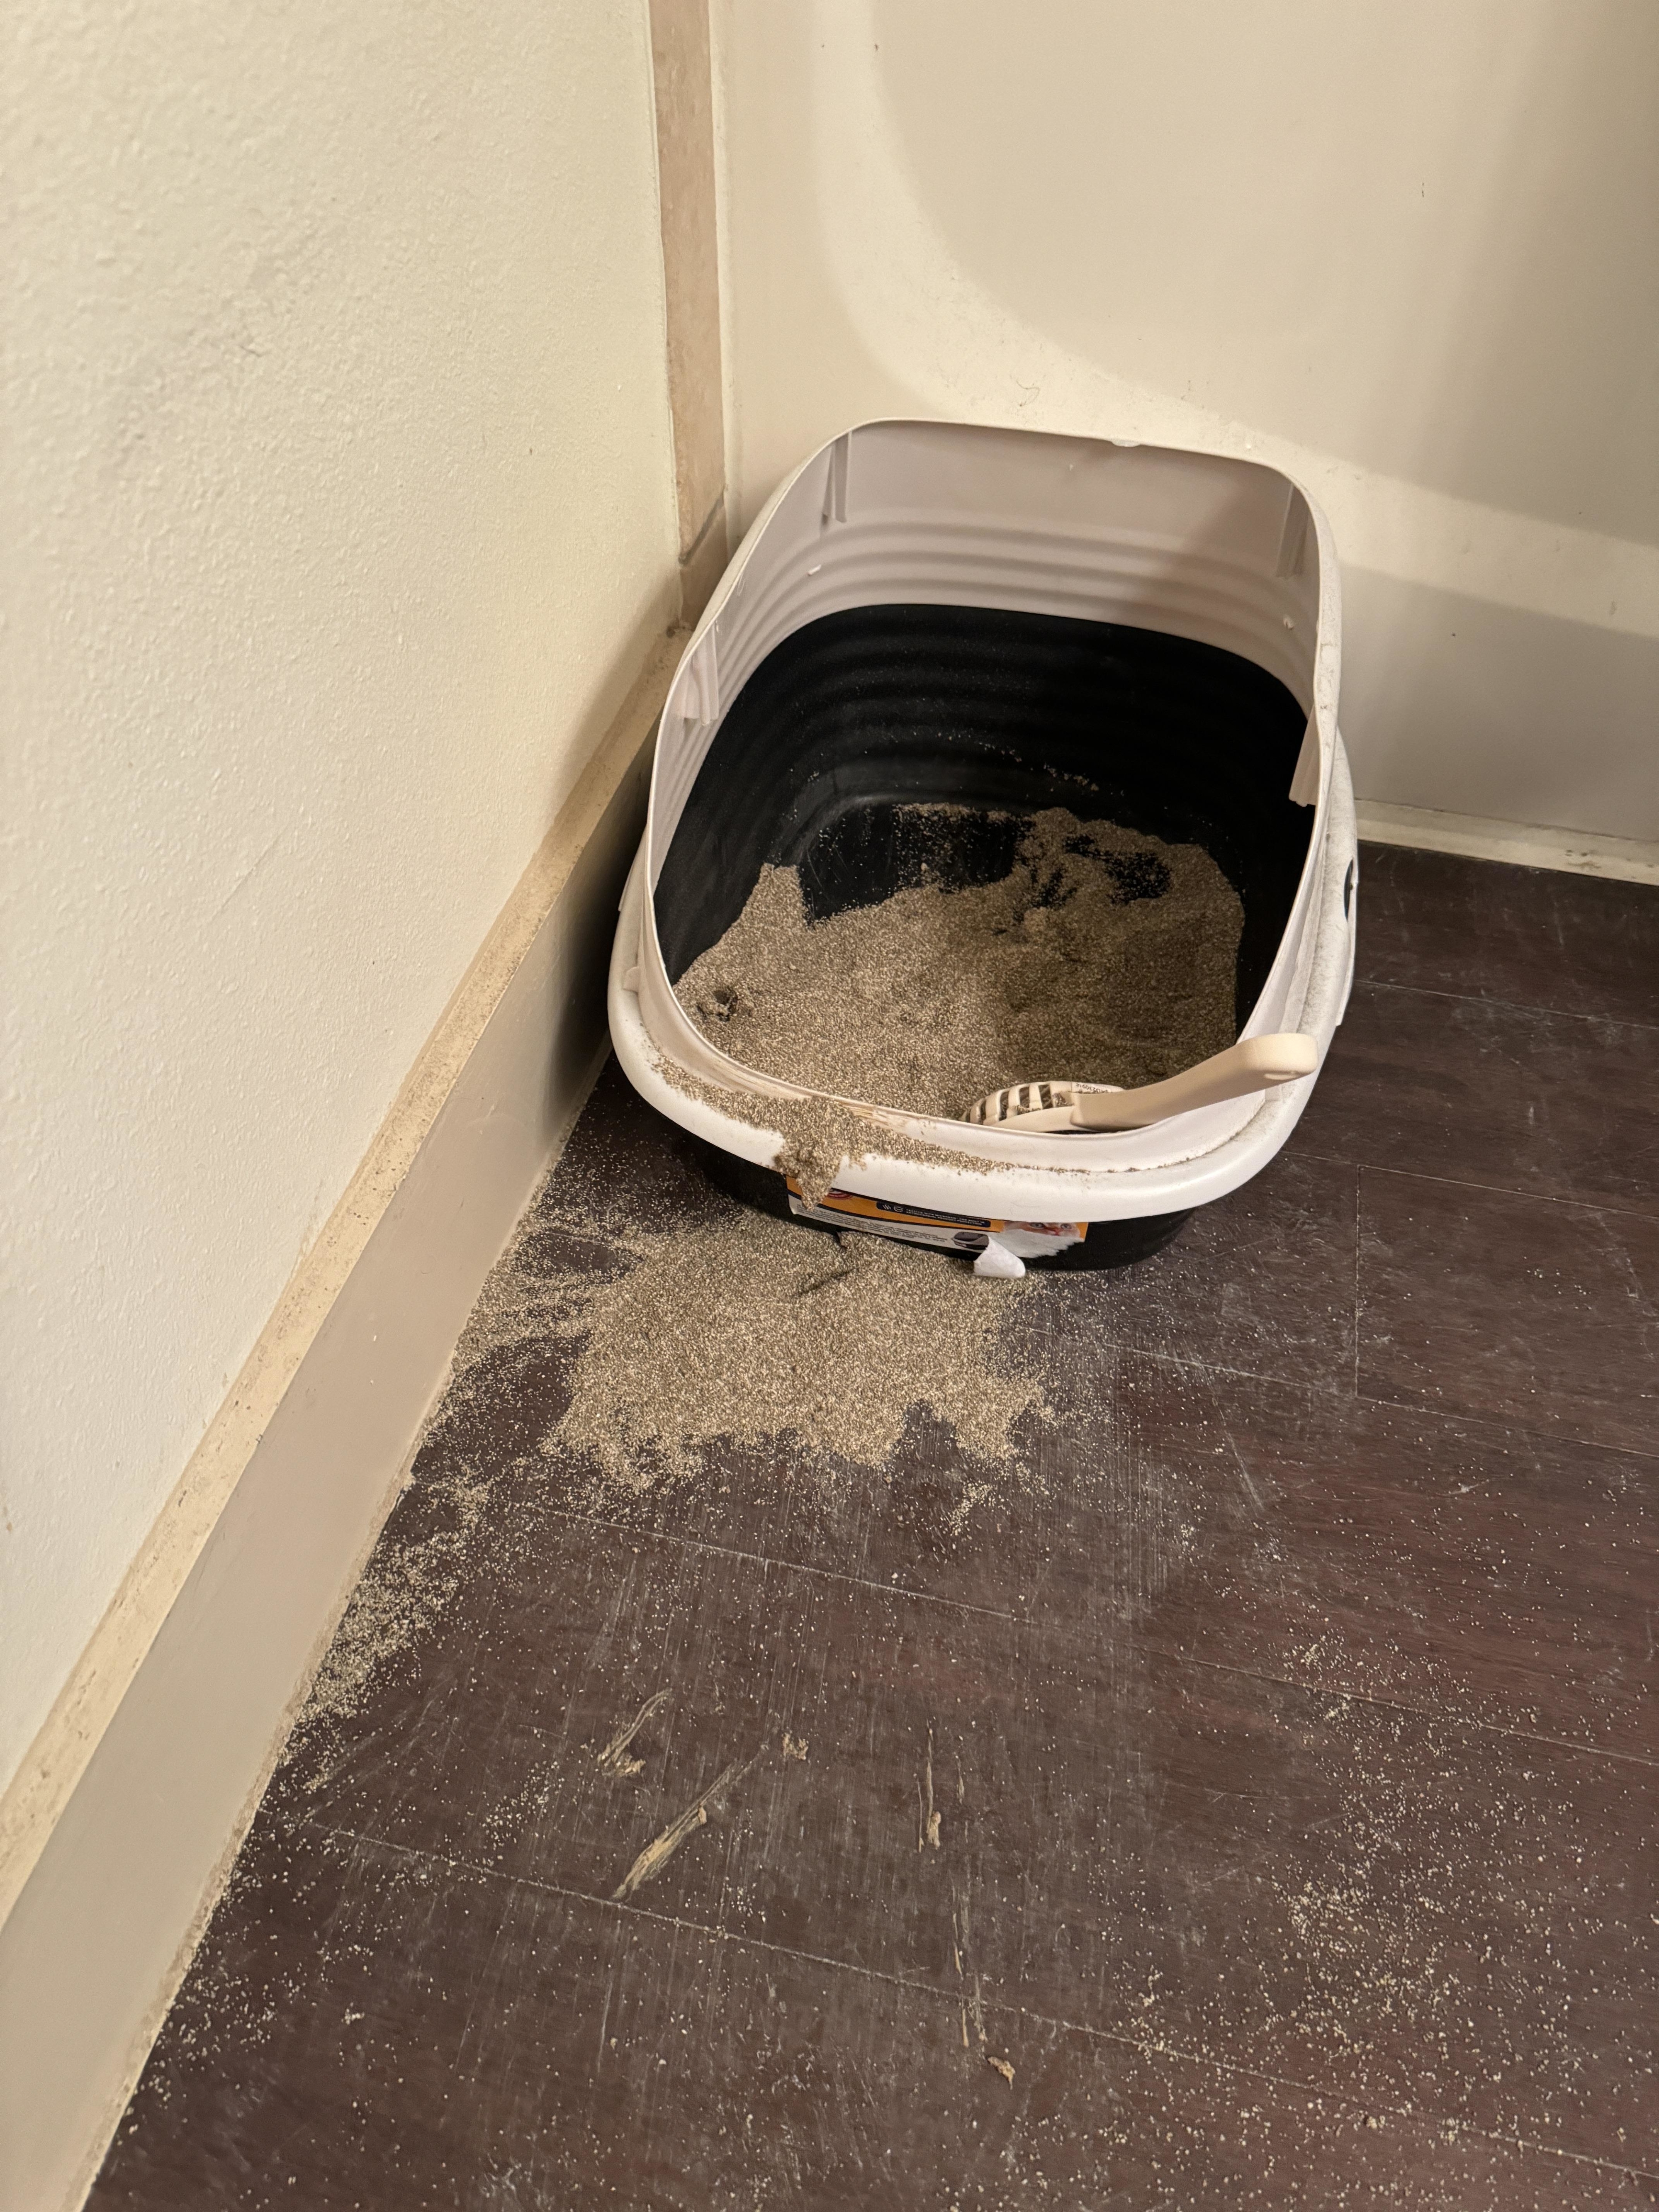 An overturned cat litter box with litter spilled on the floor